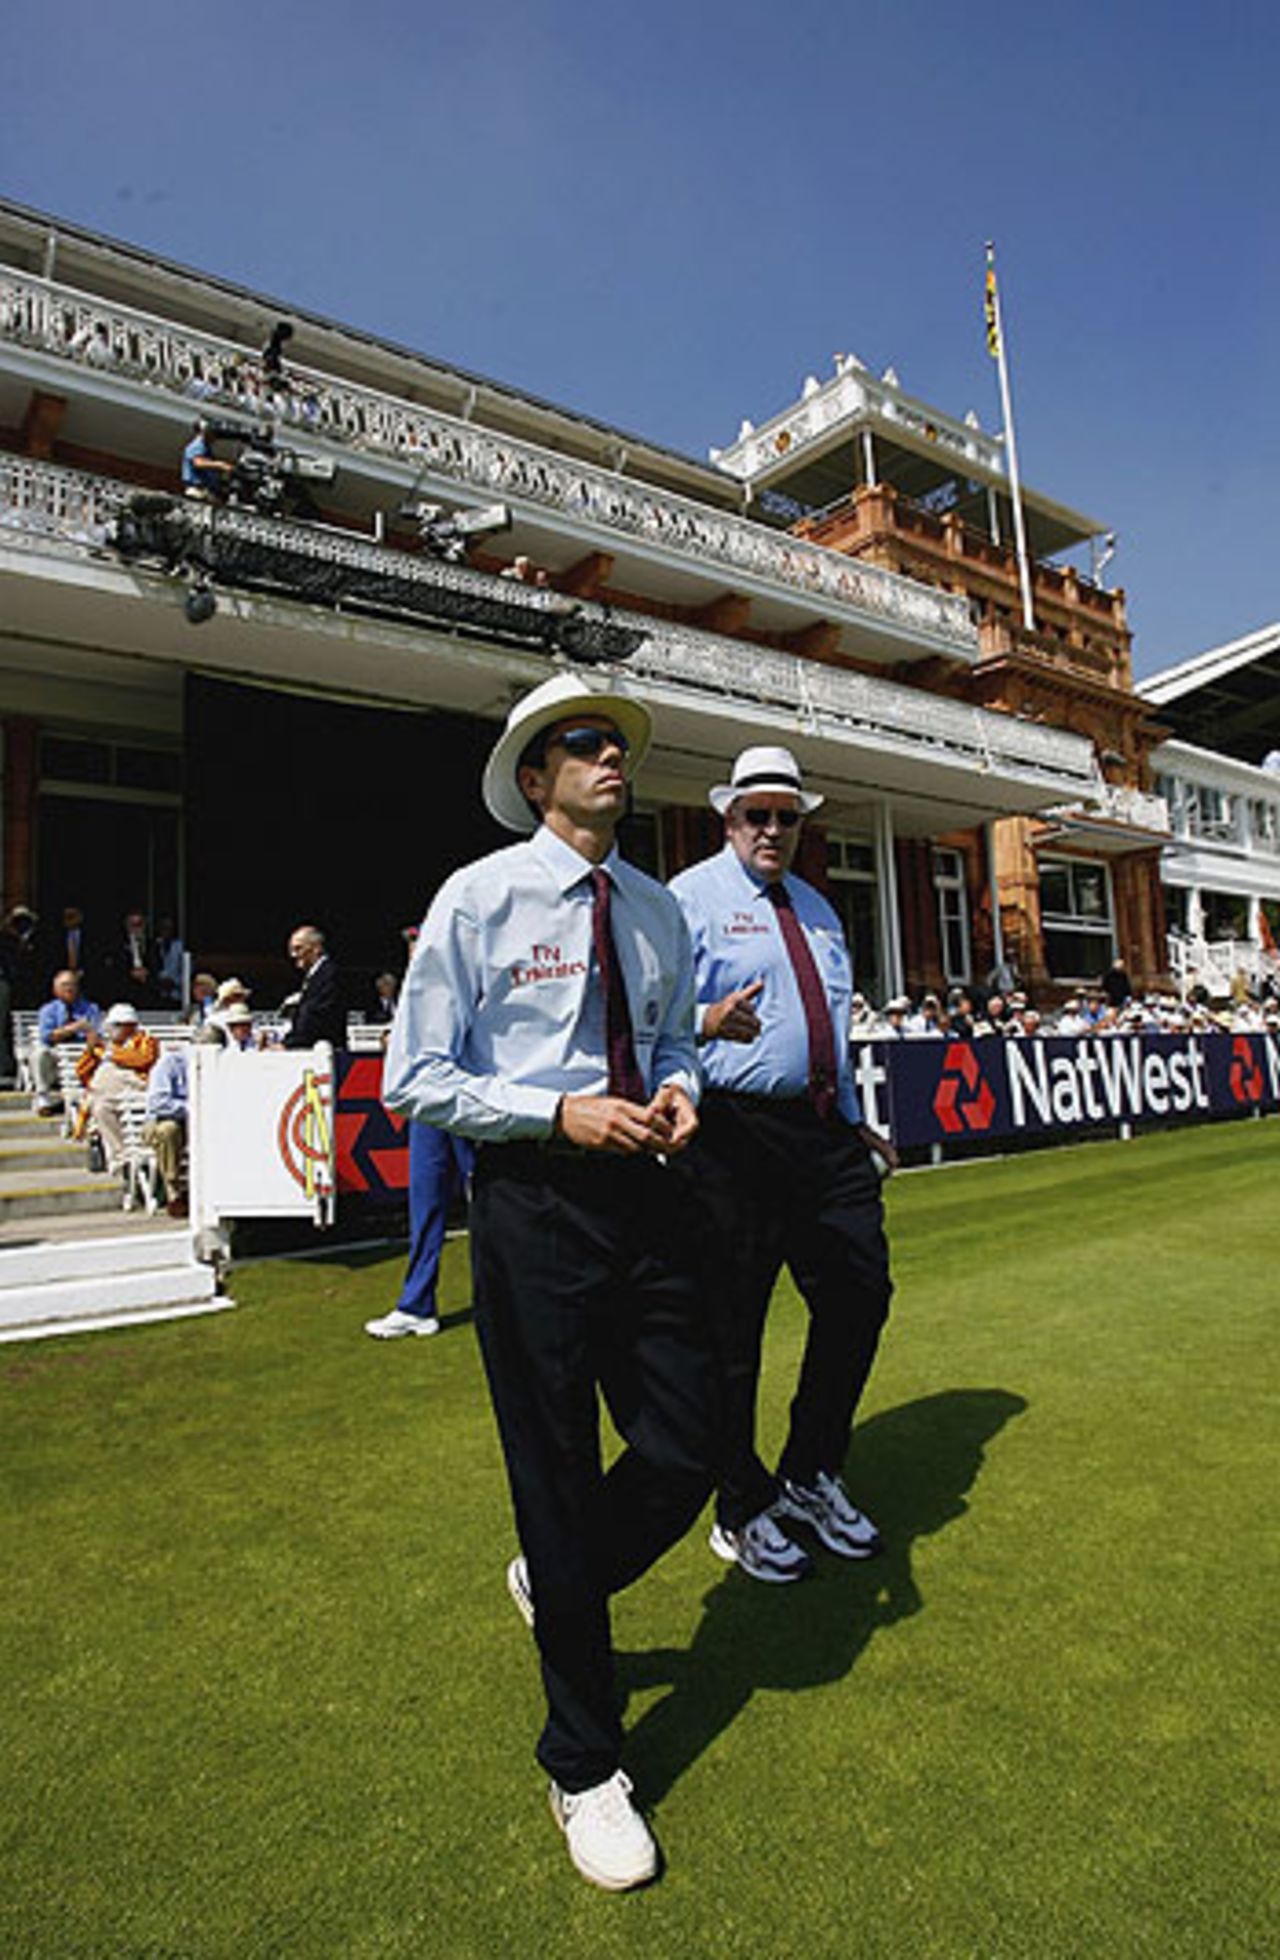 Umpires Nigel Llong and Darrell Hair walk out to the middle, England v Sri Lanka, 1st ODI, Lord's, June 17, 2006